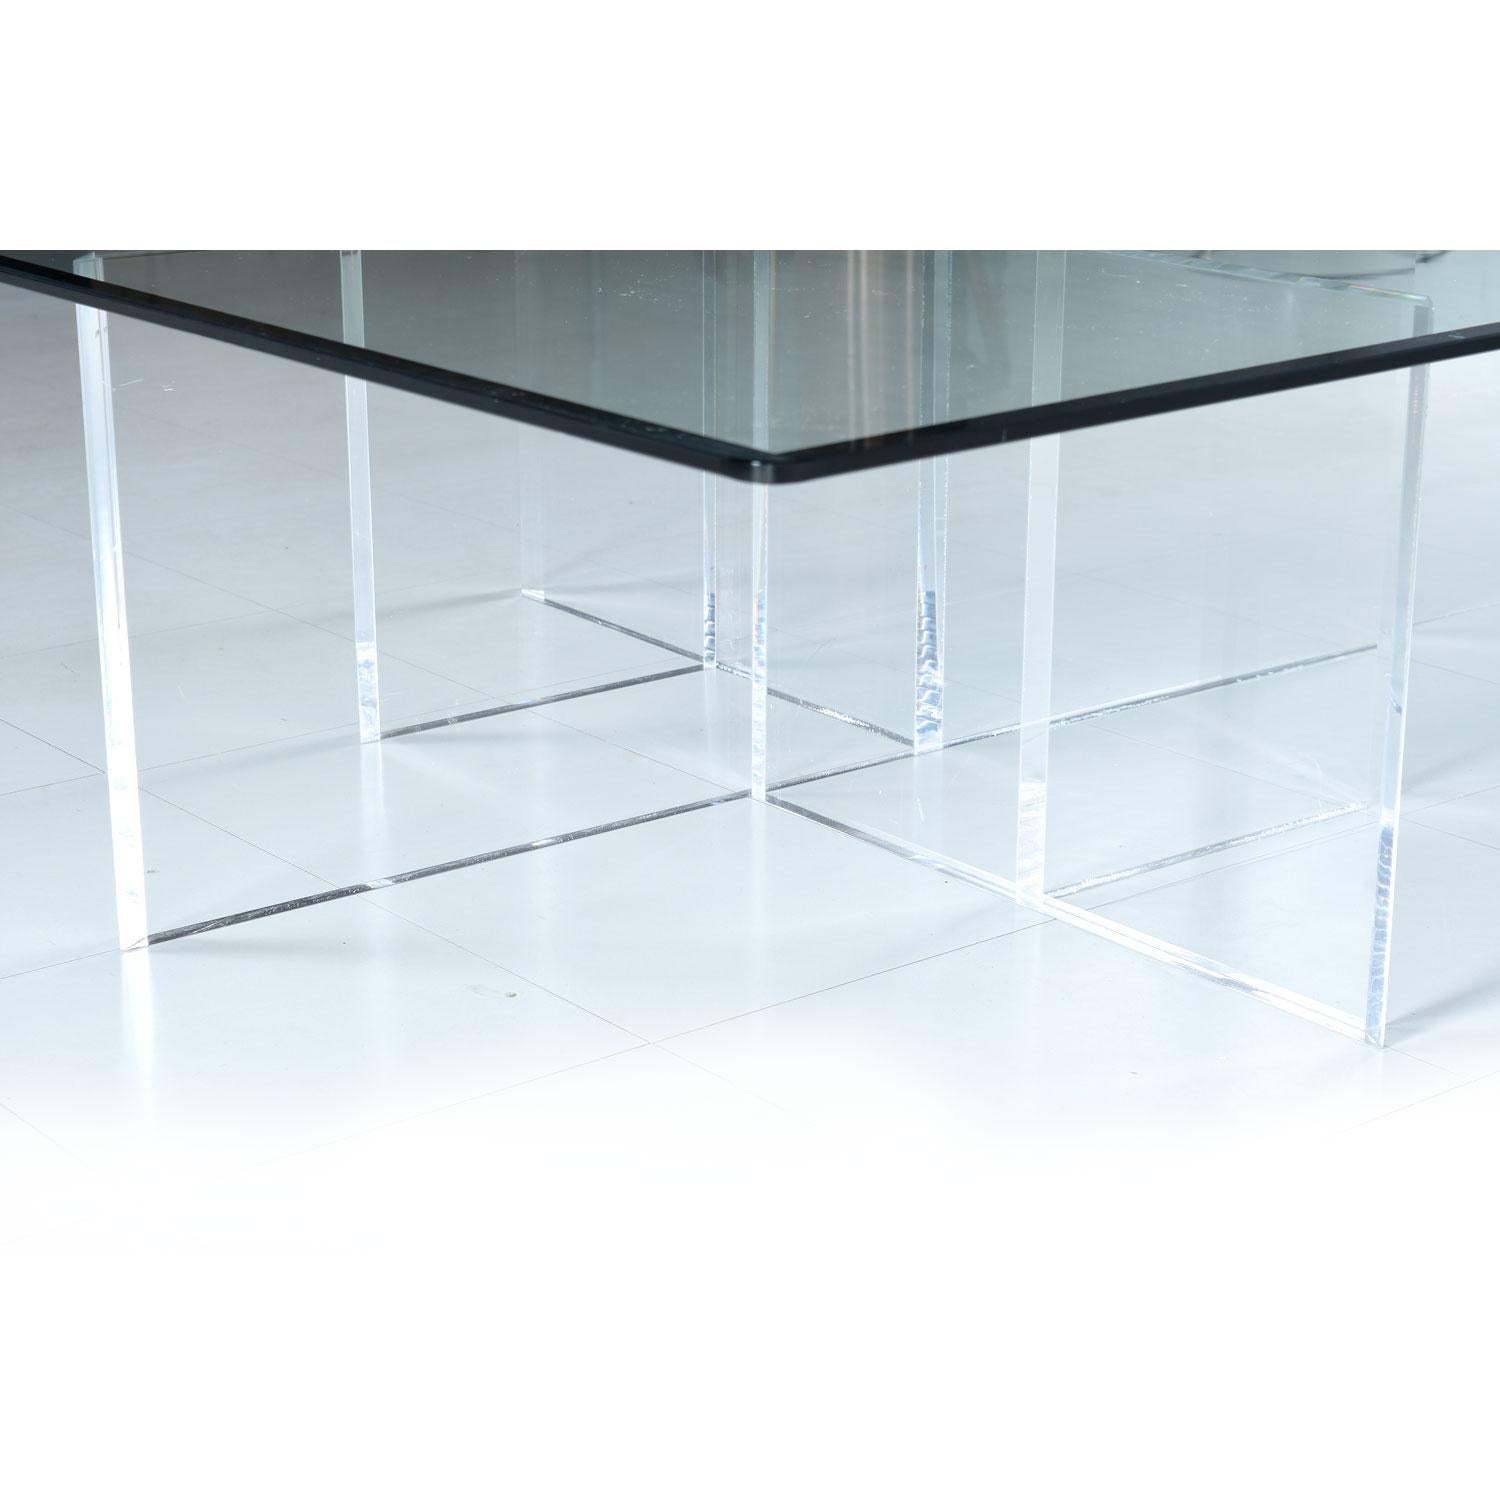 Late 20th Century Massive 1970s Hollis Style Lucite Acrylic Coffee Table Base with New Glass